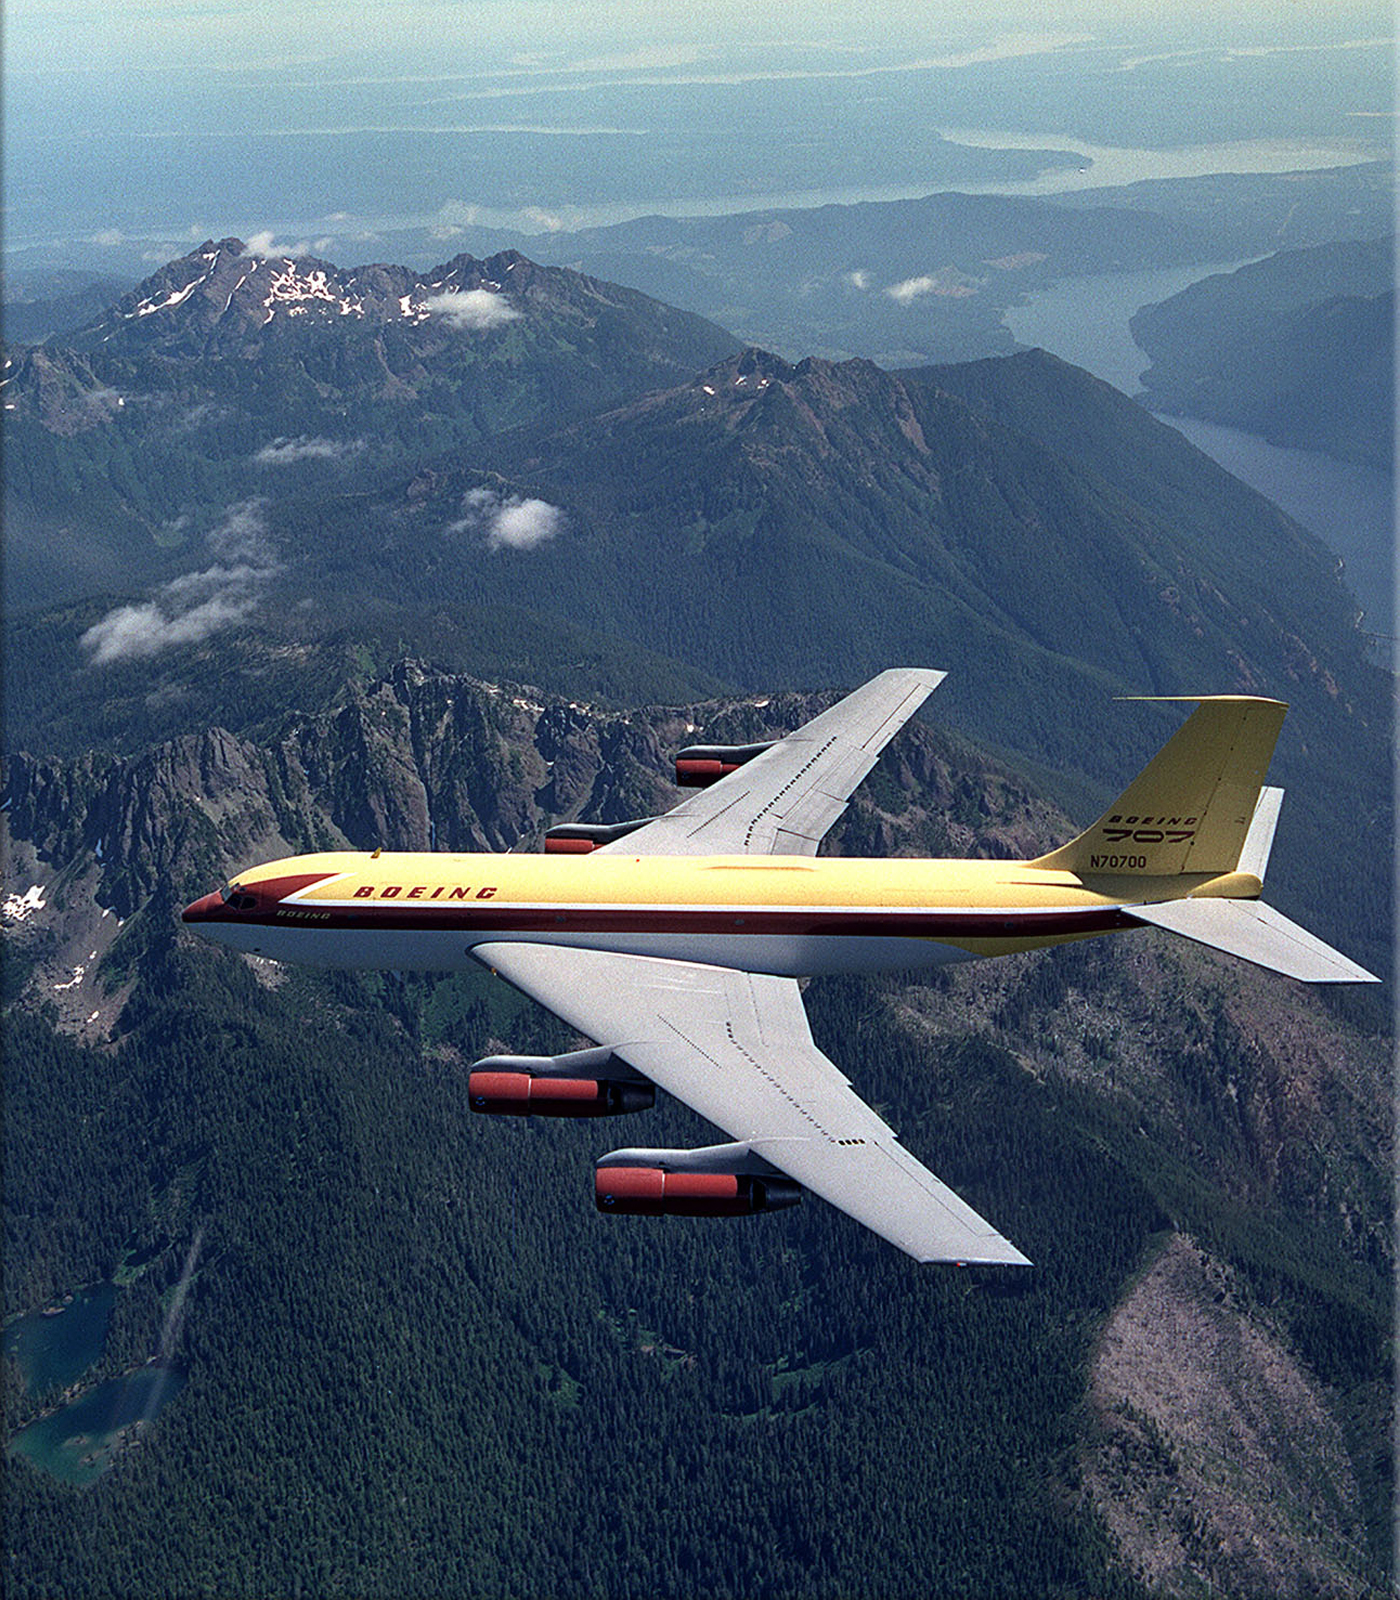 First flight of the Boeing 367-80, prototype for both the Boeing 707 and C-135 series